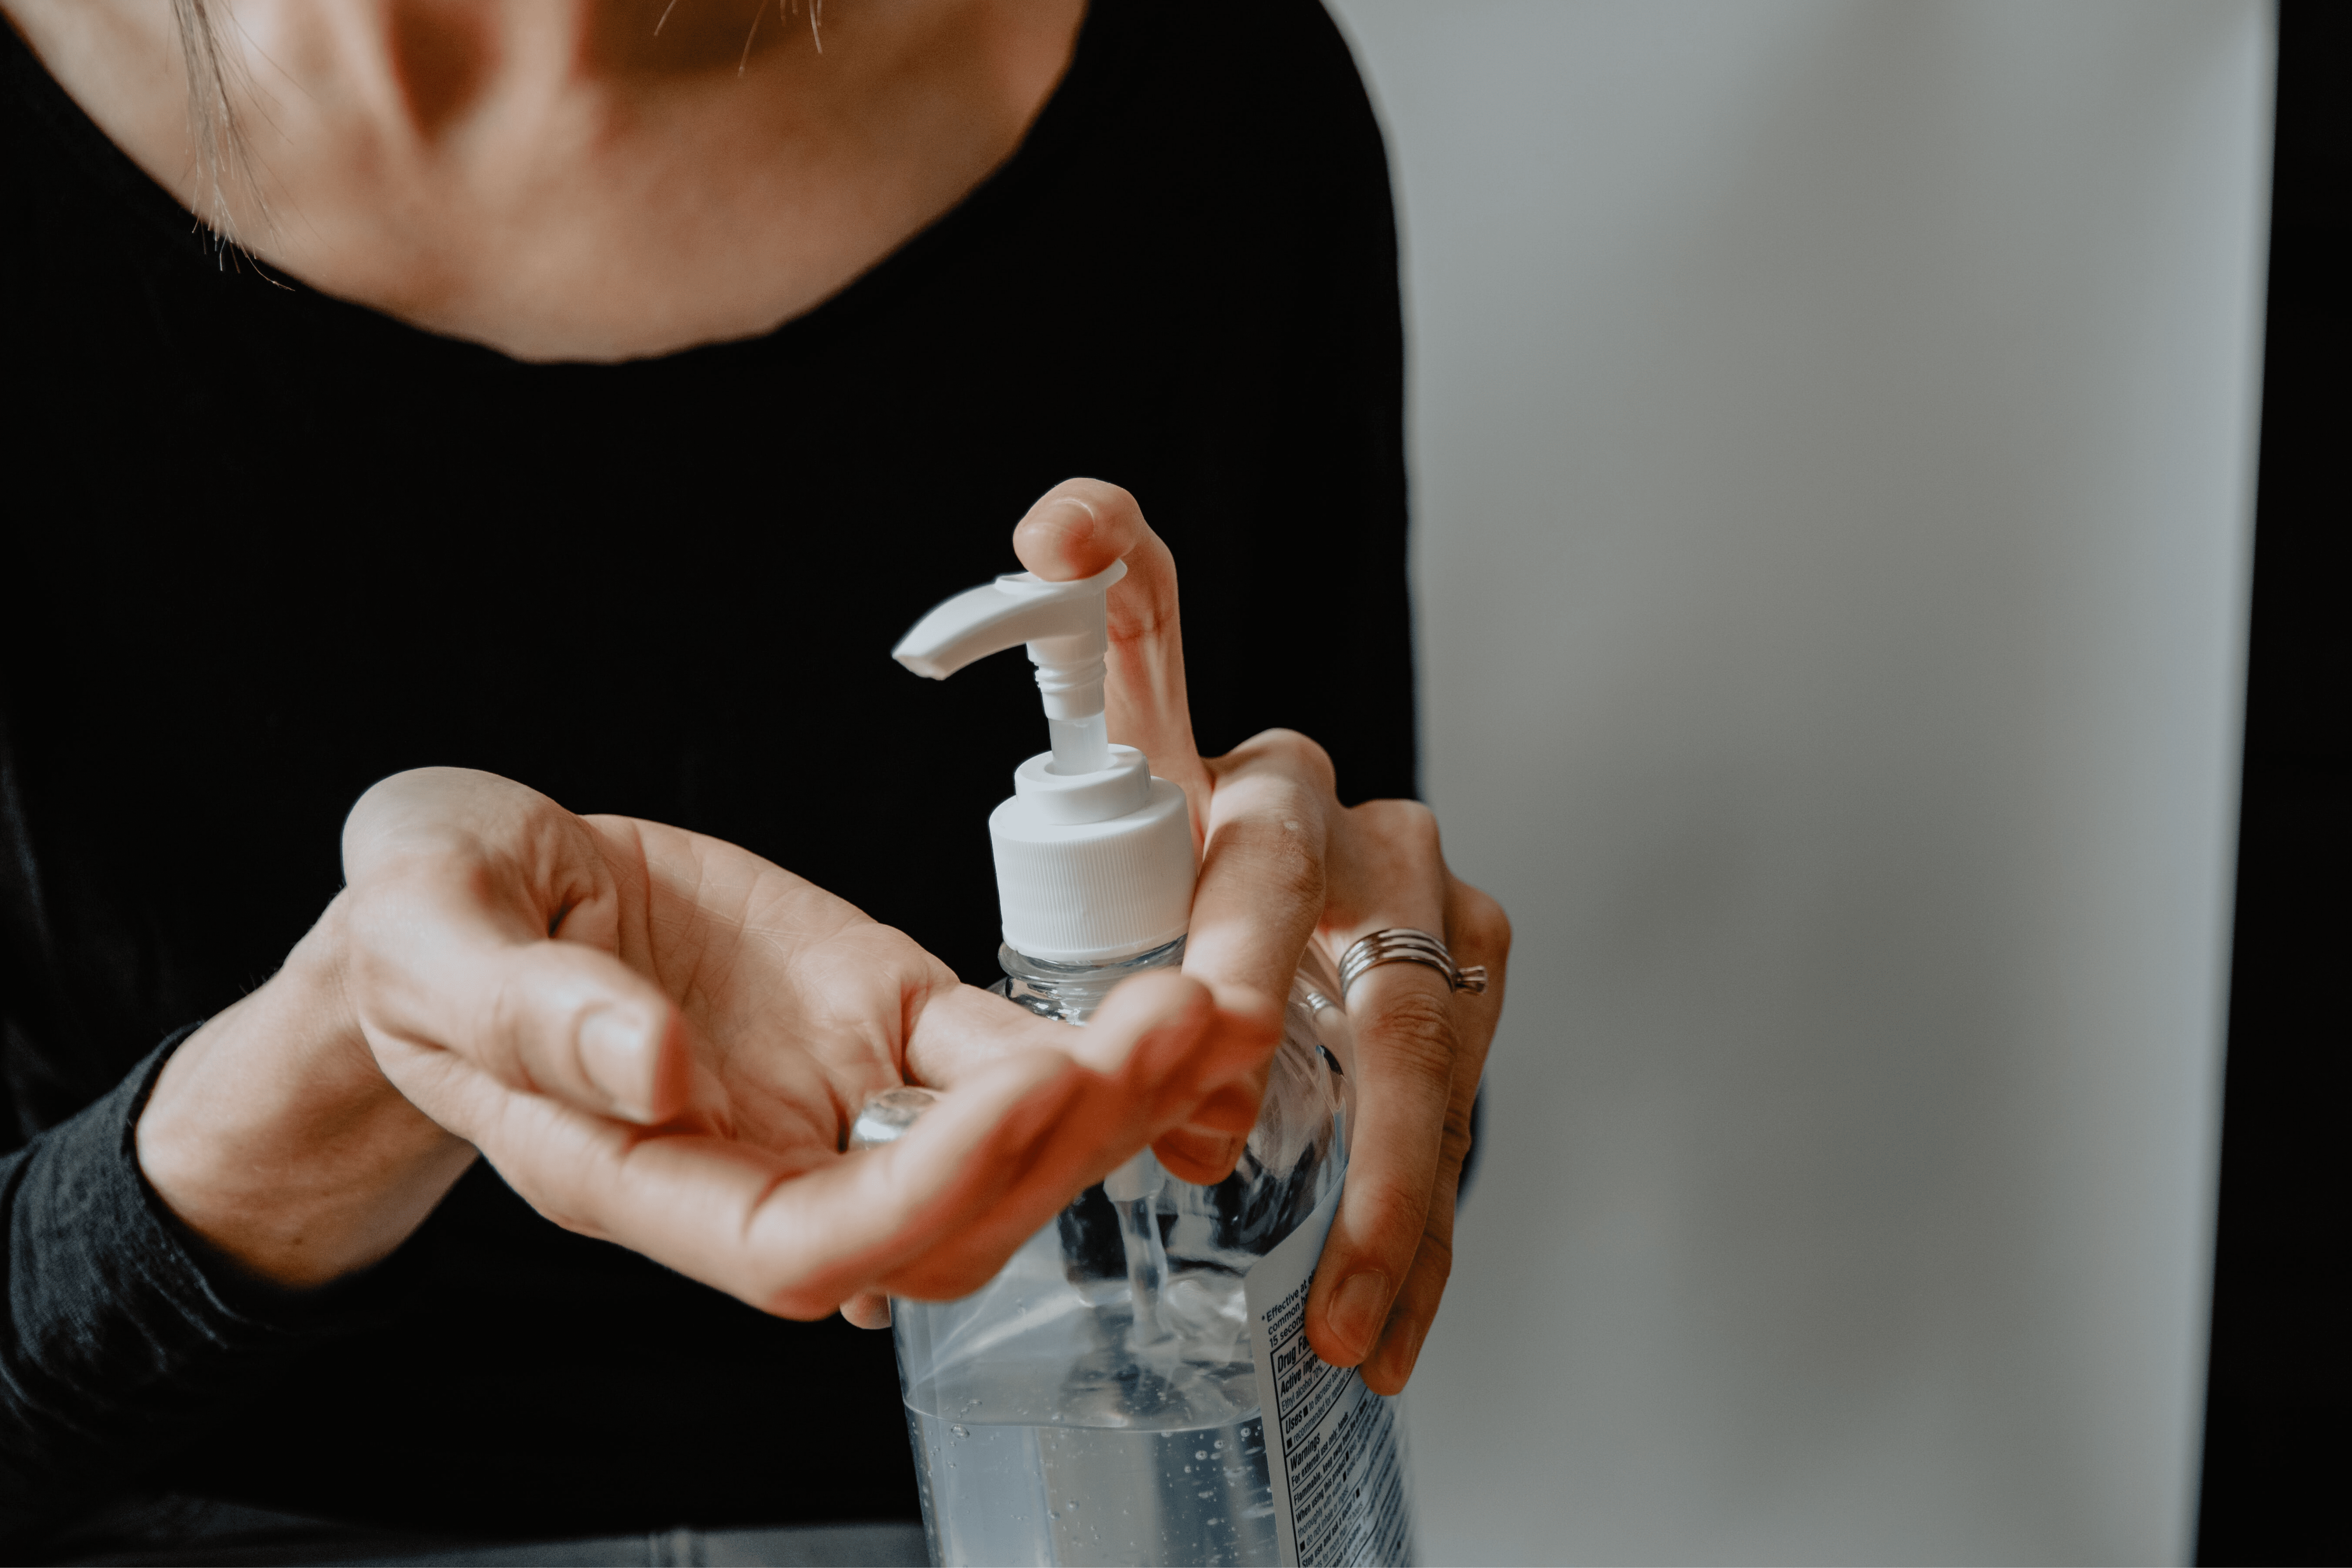 How to make simple hand sanitizer at home